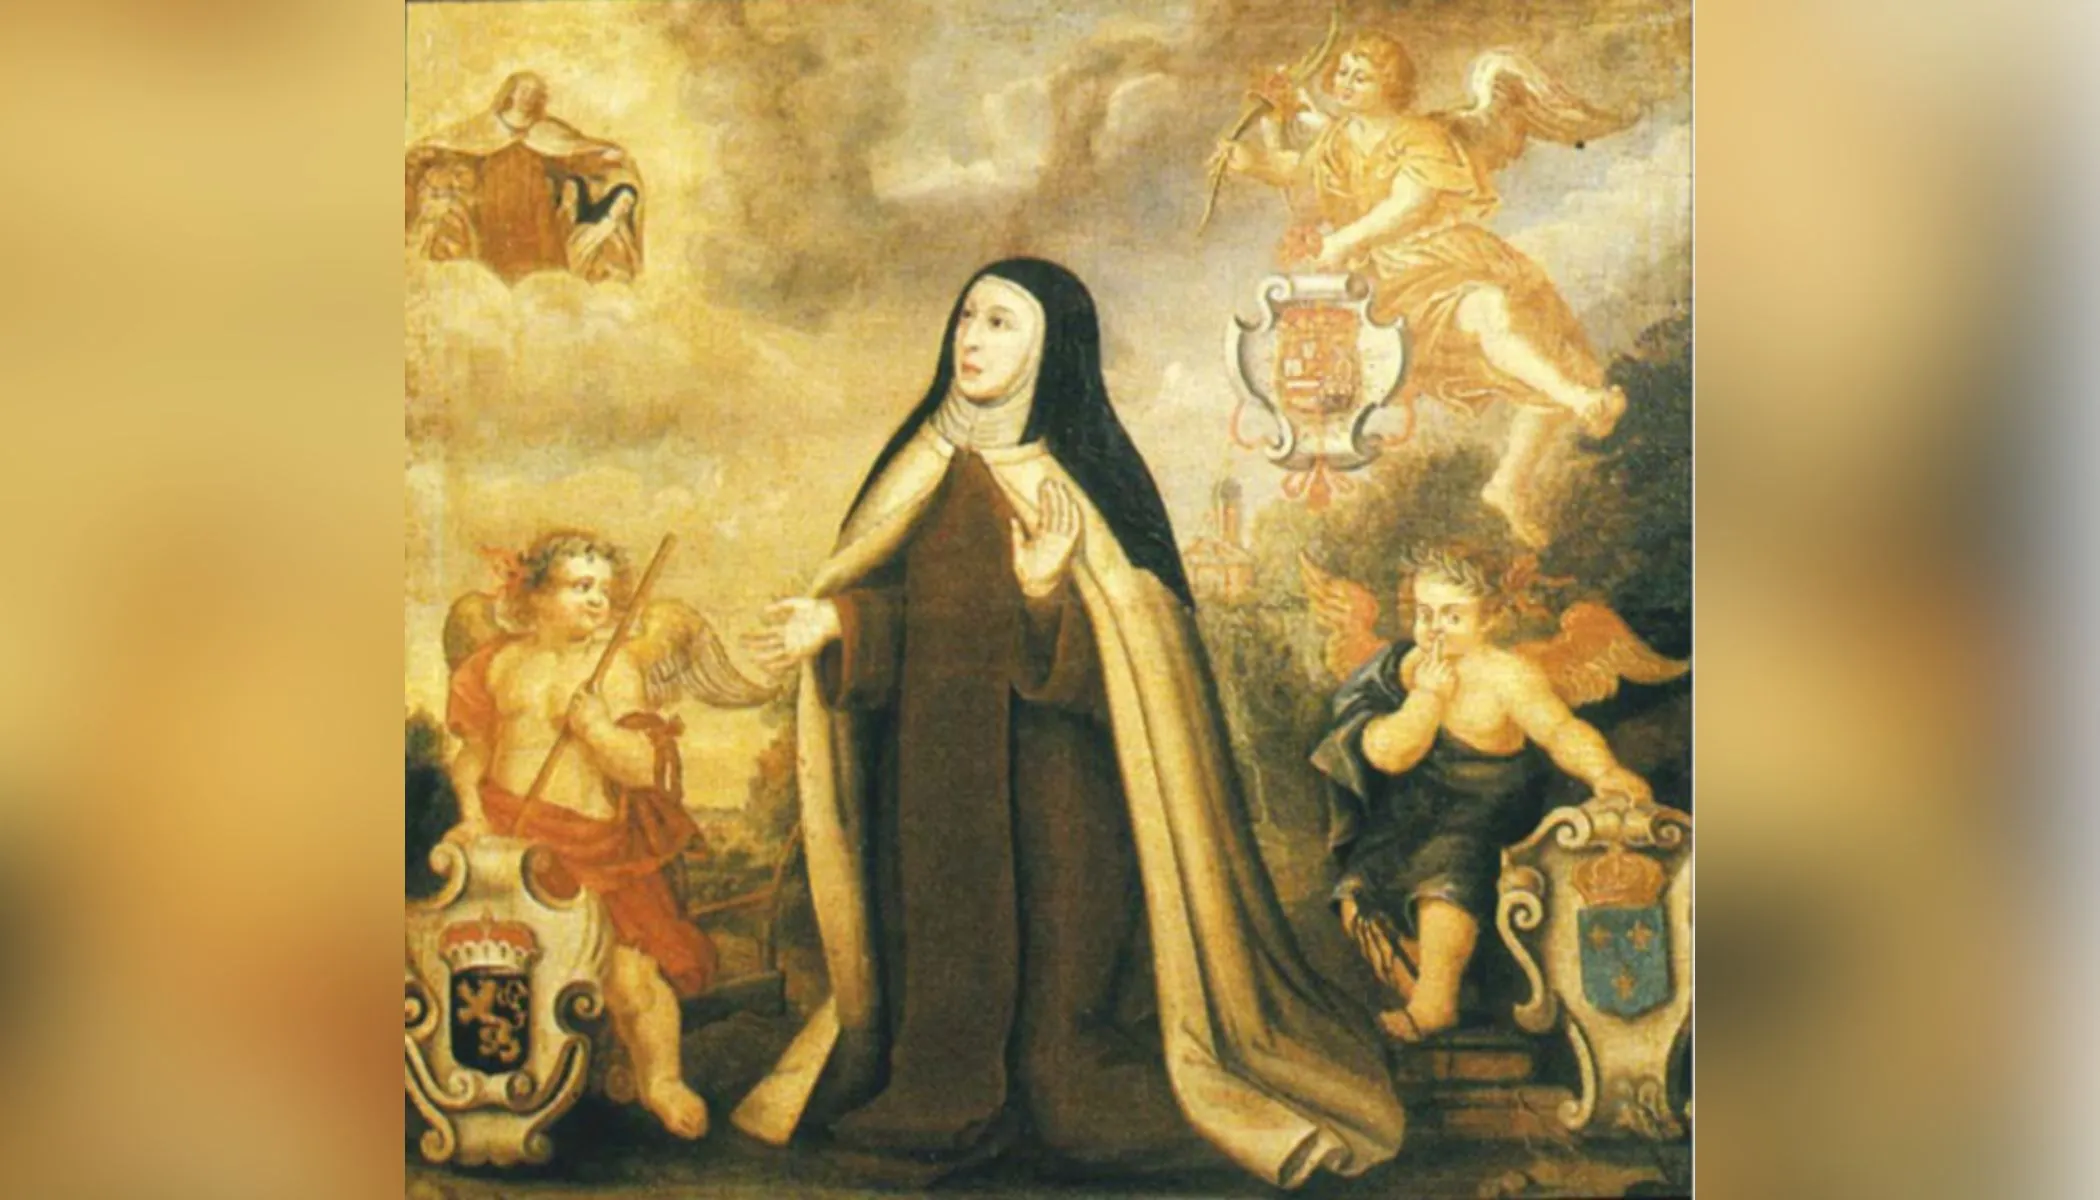 Ana de Lobera y Torres (1545-1621), better known by her religious name Sister Ana de Jesús, helped expand the Discalced Carmelites to France and Belgium. Painting in the monastery of the Discalced Carmelites, Brussels, ca. 1650.?w=200&h=150